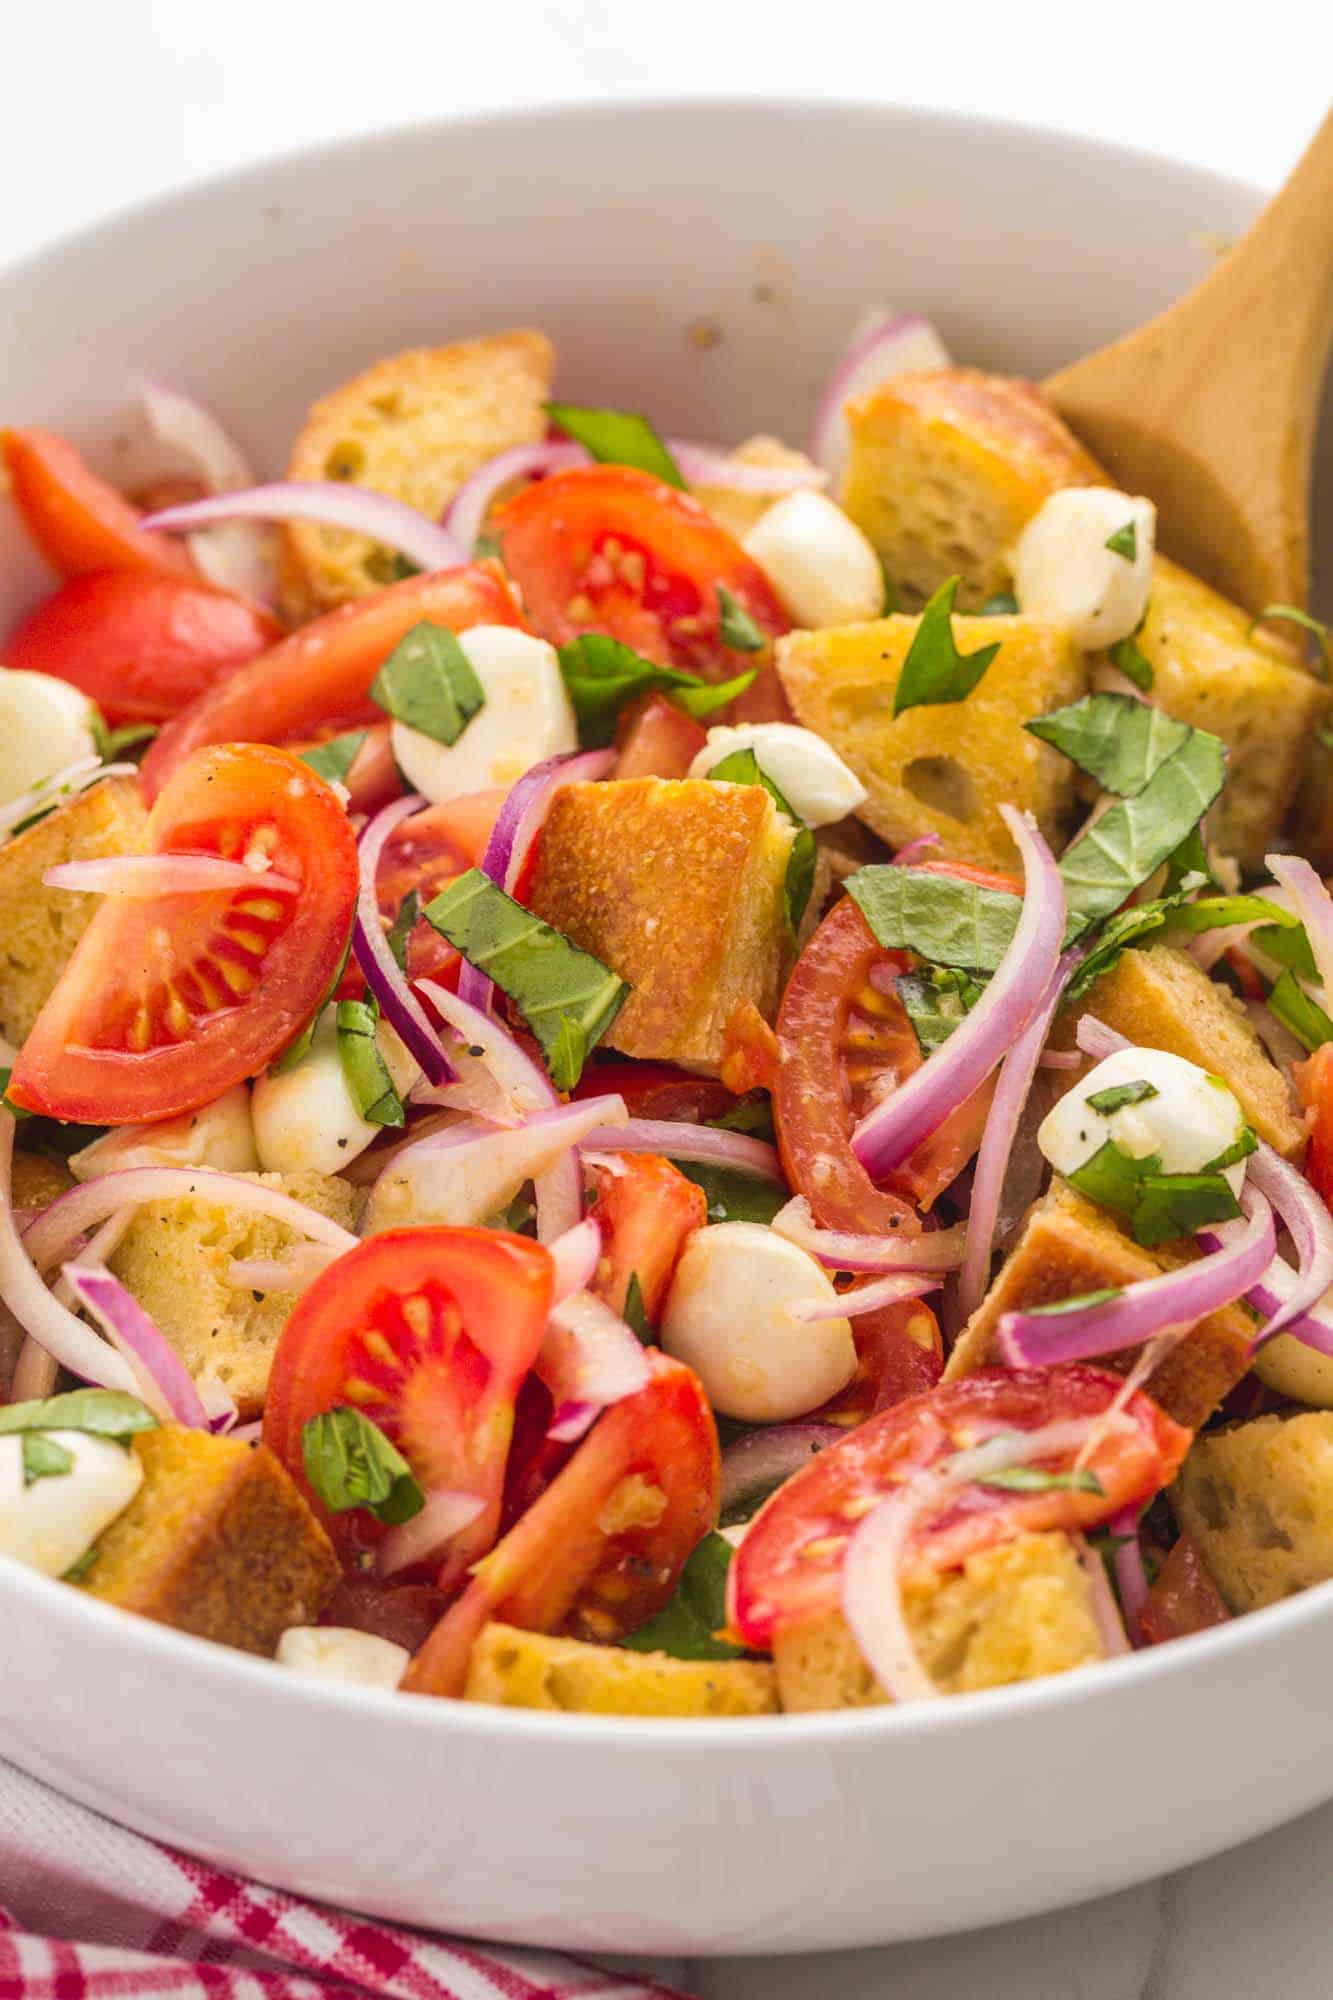 a large white ceramic bowl filled with panzanella salad of bread cubes, tomatoes, onions, herbs, and mozzarella cheese